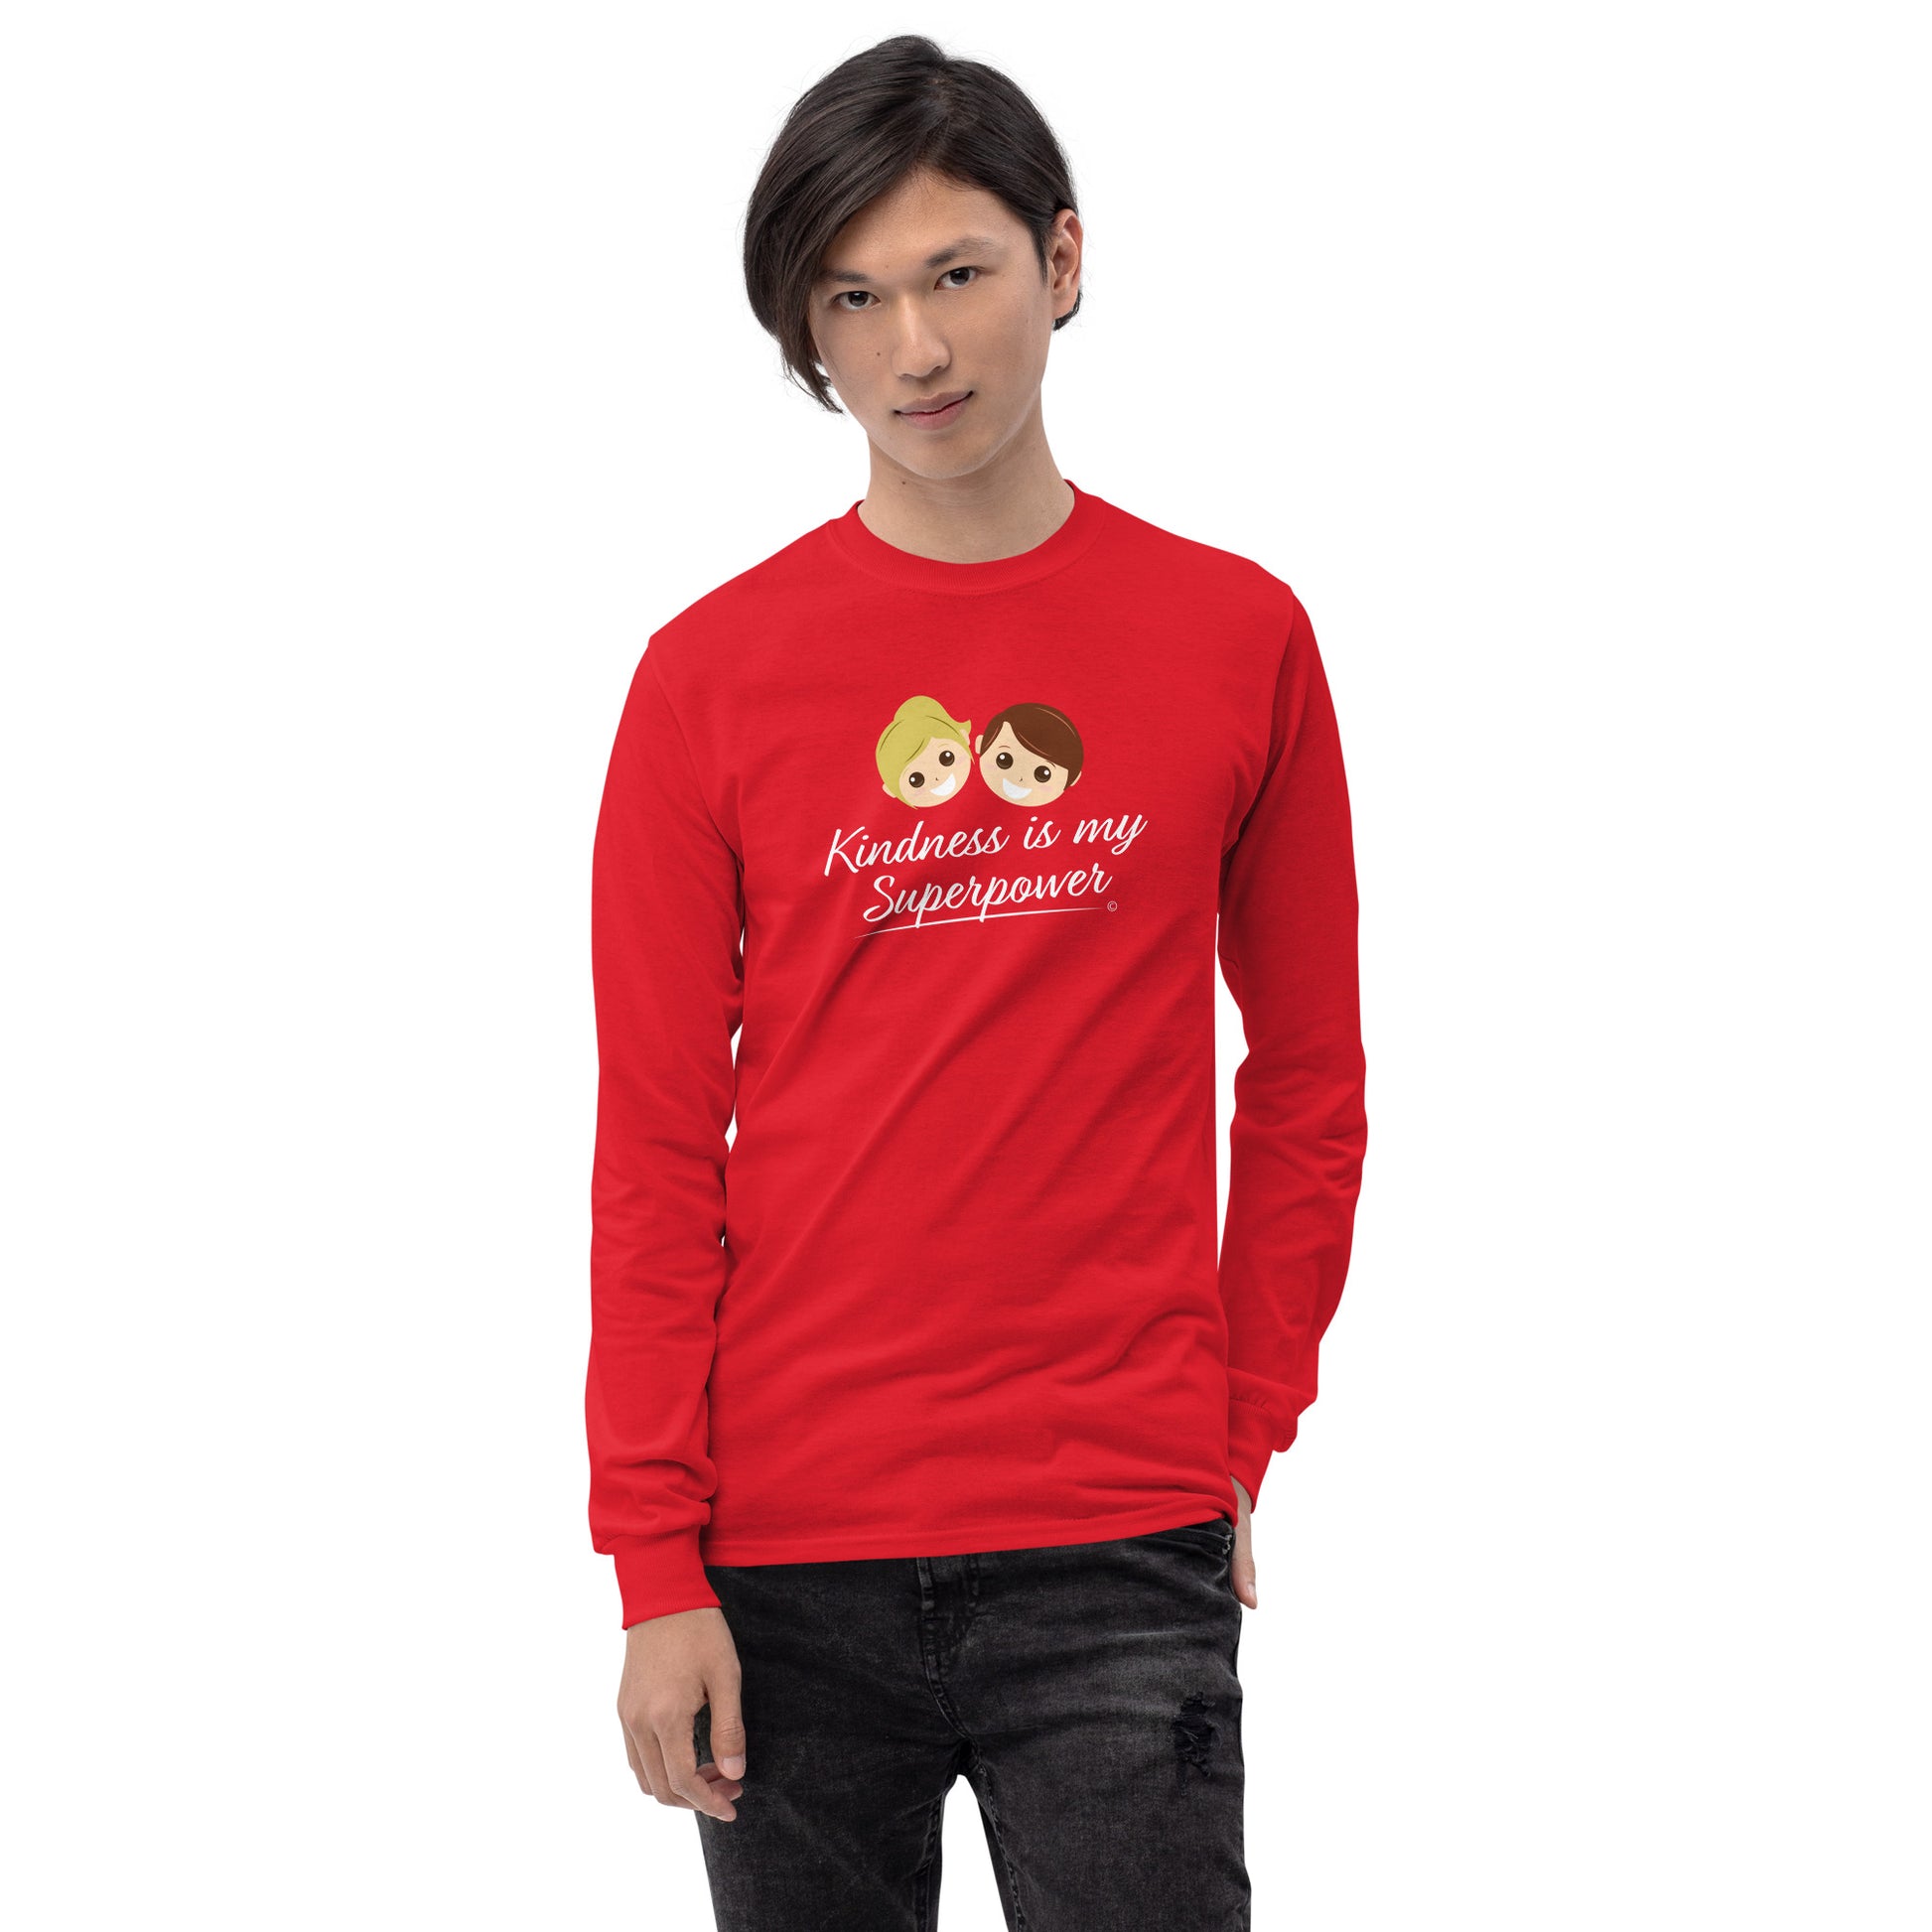 A confident young man wearing a stylish long sleeve shirt in red, featuring the empowering quote 'Kindness is my Superpower' in bold lettering.